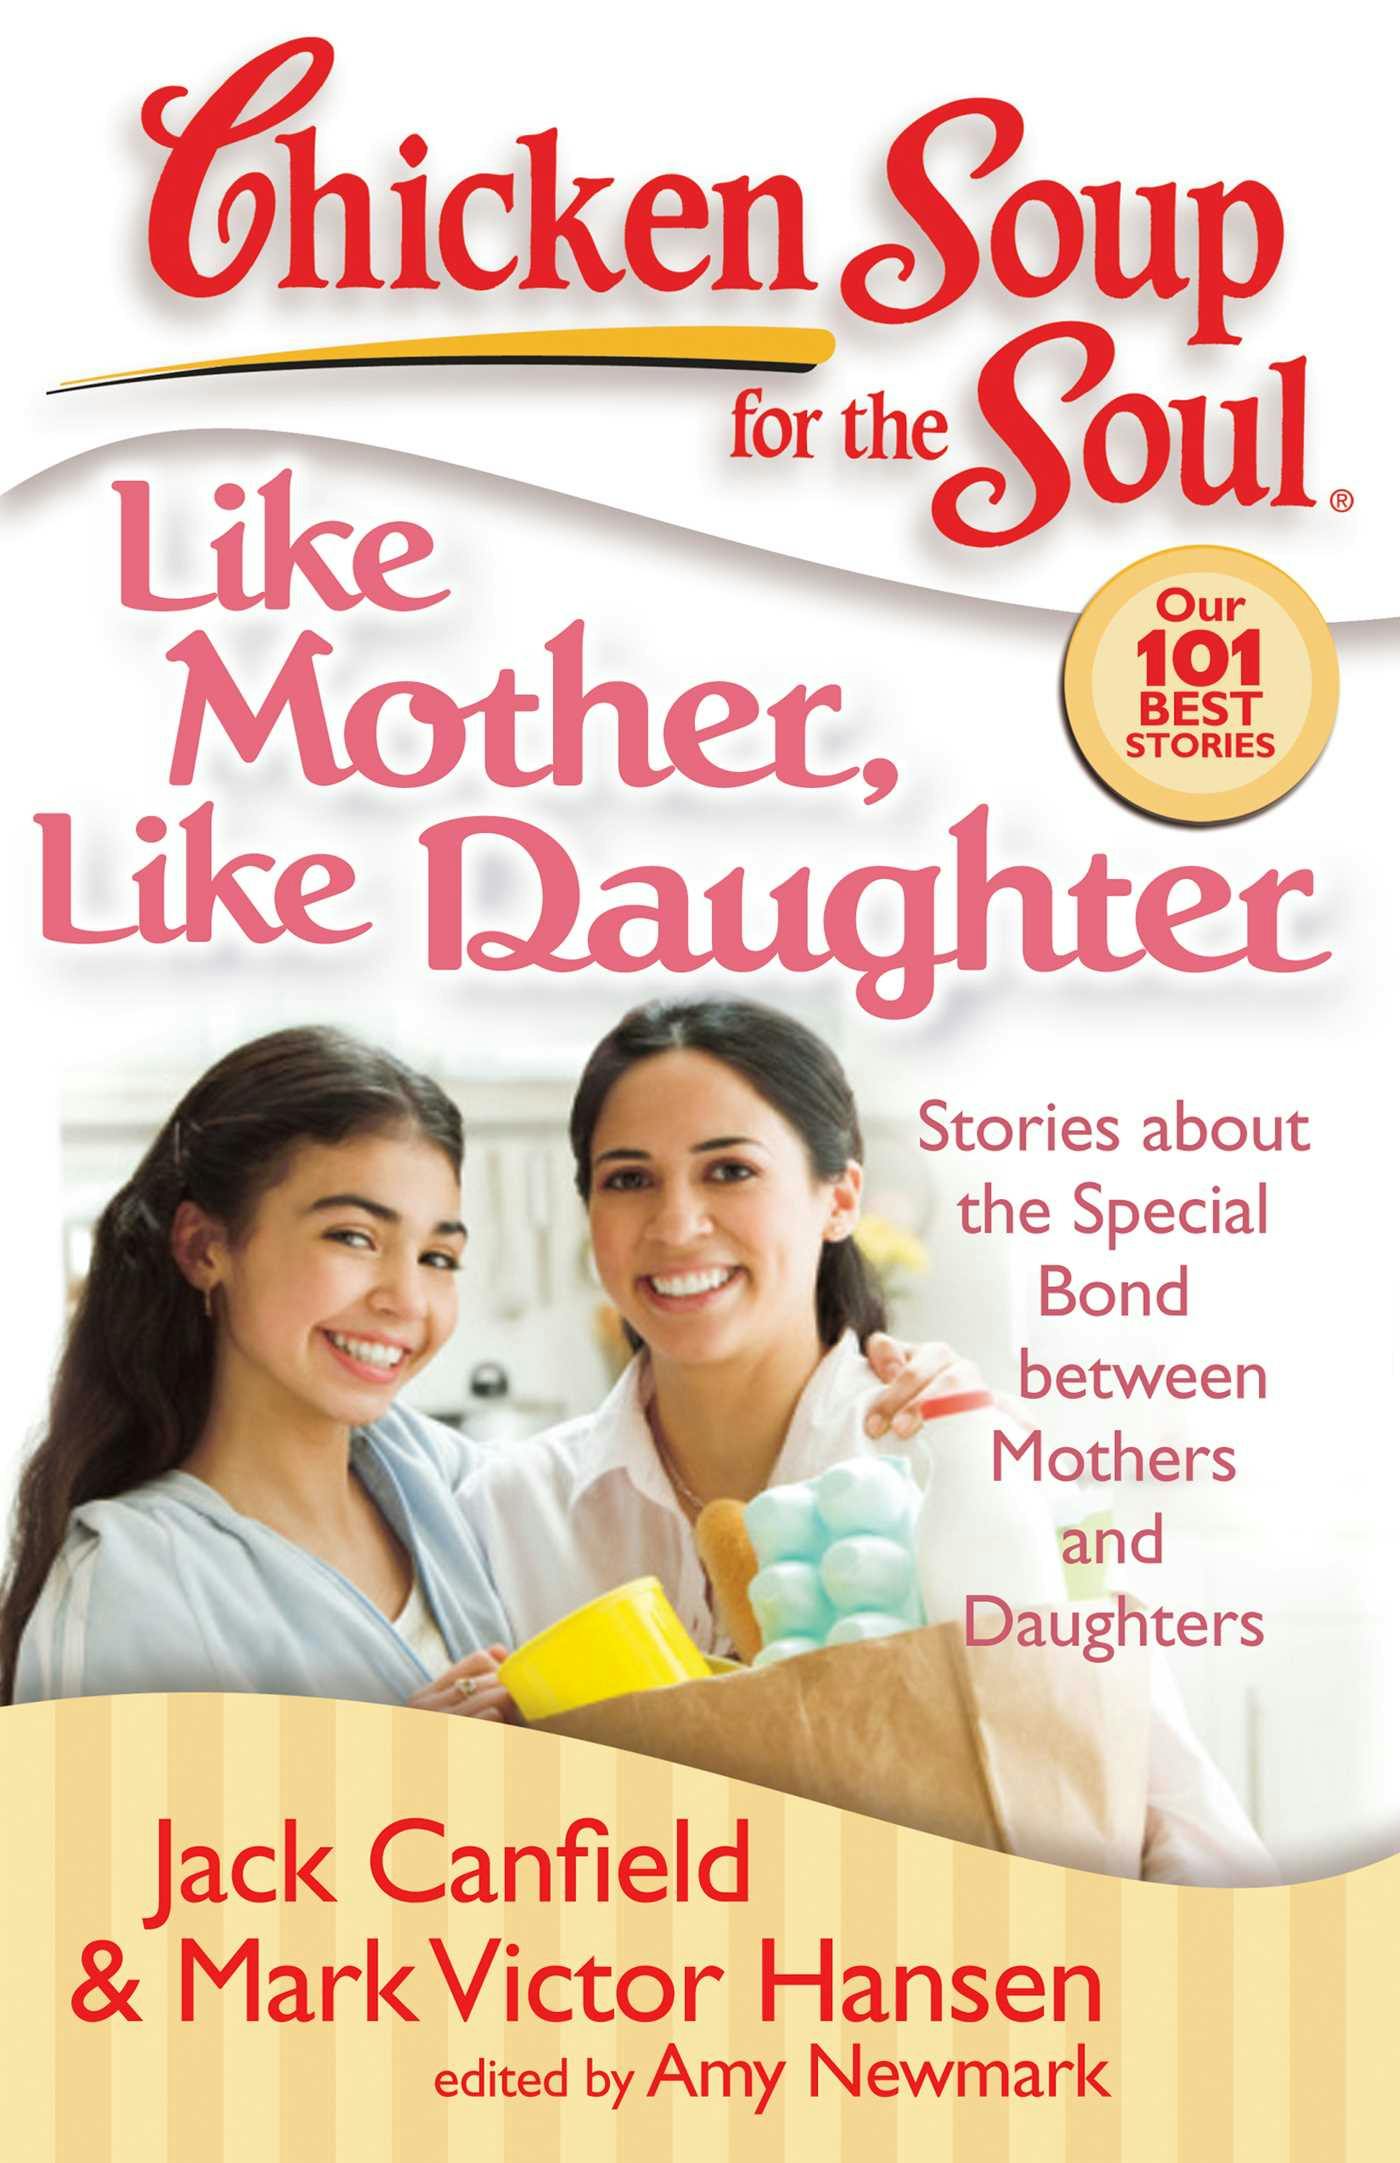 Chicken Soup for the Soul: Like Mother, Like Daughter: Stories about the Special Bond between Mothers and Daughters - Mark Victor Hansen, Jack Canfield, Amy Newmark